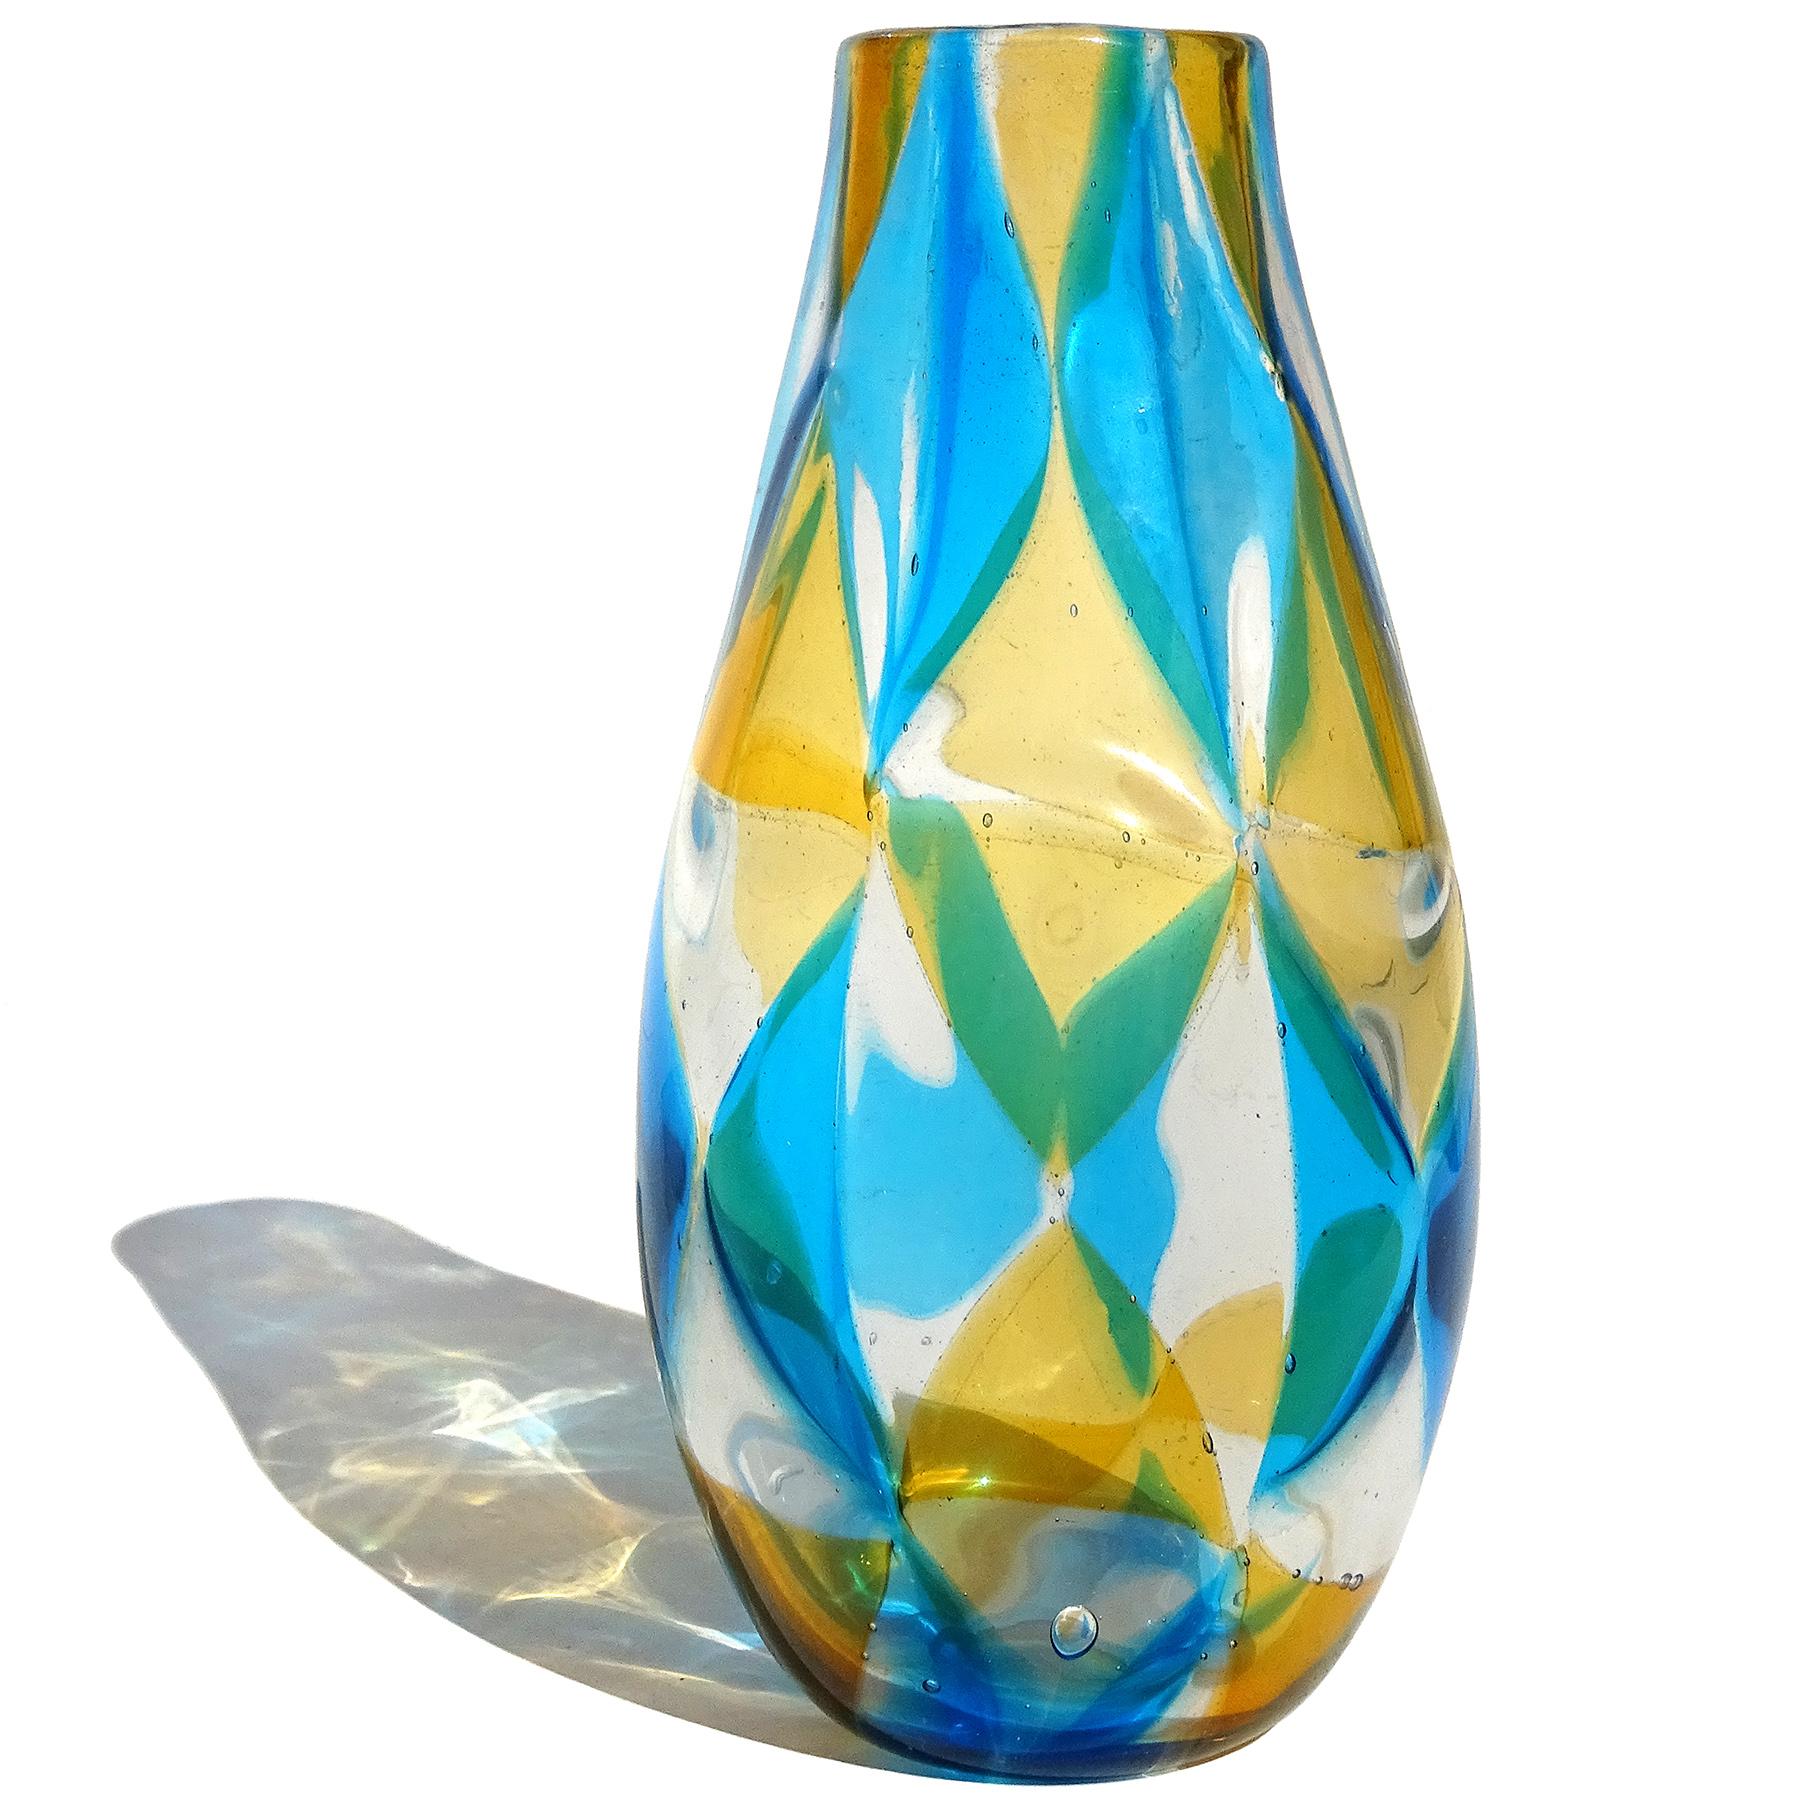 Rare and beautiful, vintage Murano hand blown orange, blue and clear triangle Tessere mosaic Italian art glass flower vase. Documented to designer Ercole Barovier, for Barovier e Toso, circa 1961-1967. Published design in many books. Created in the